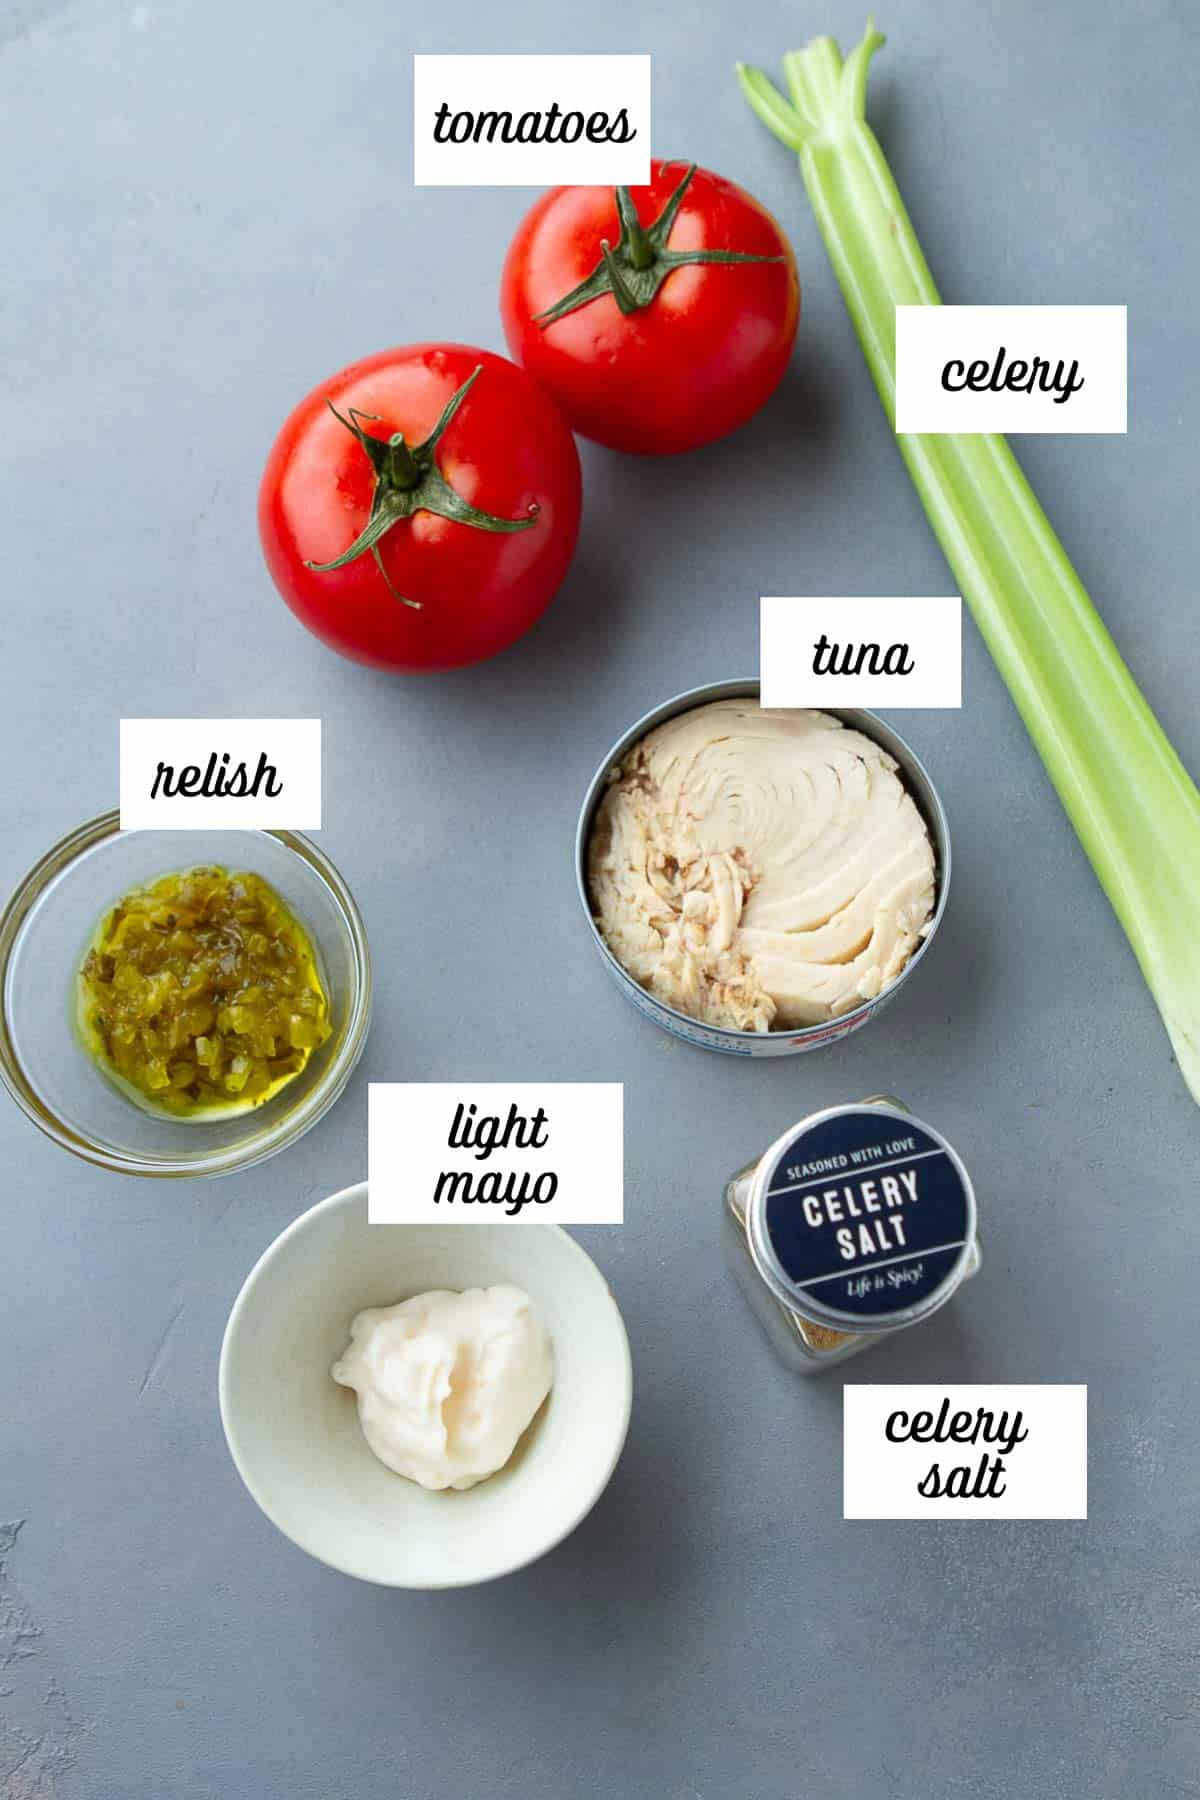 Labeled ingredients for tuna salad stuffed tomatoes.